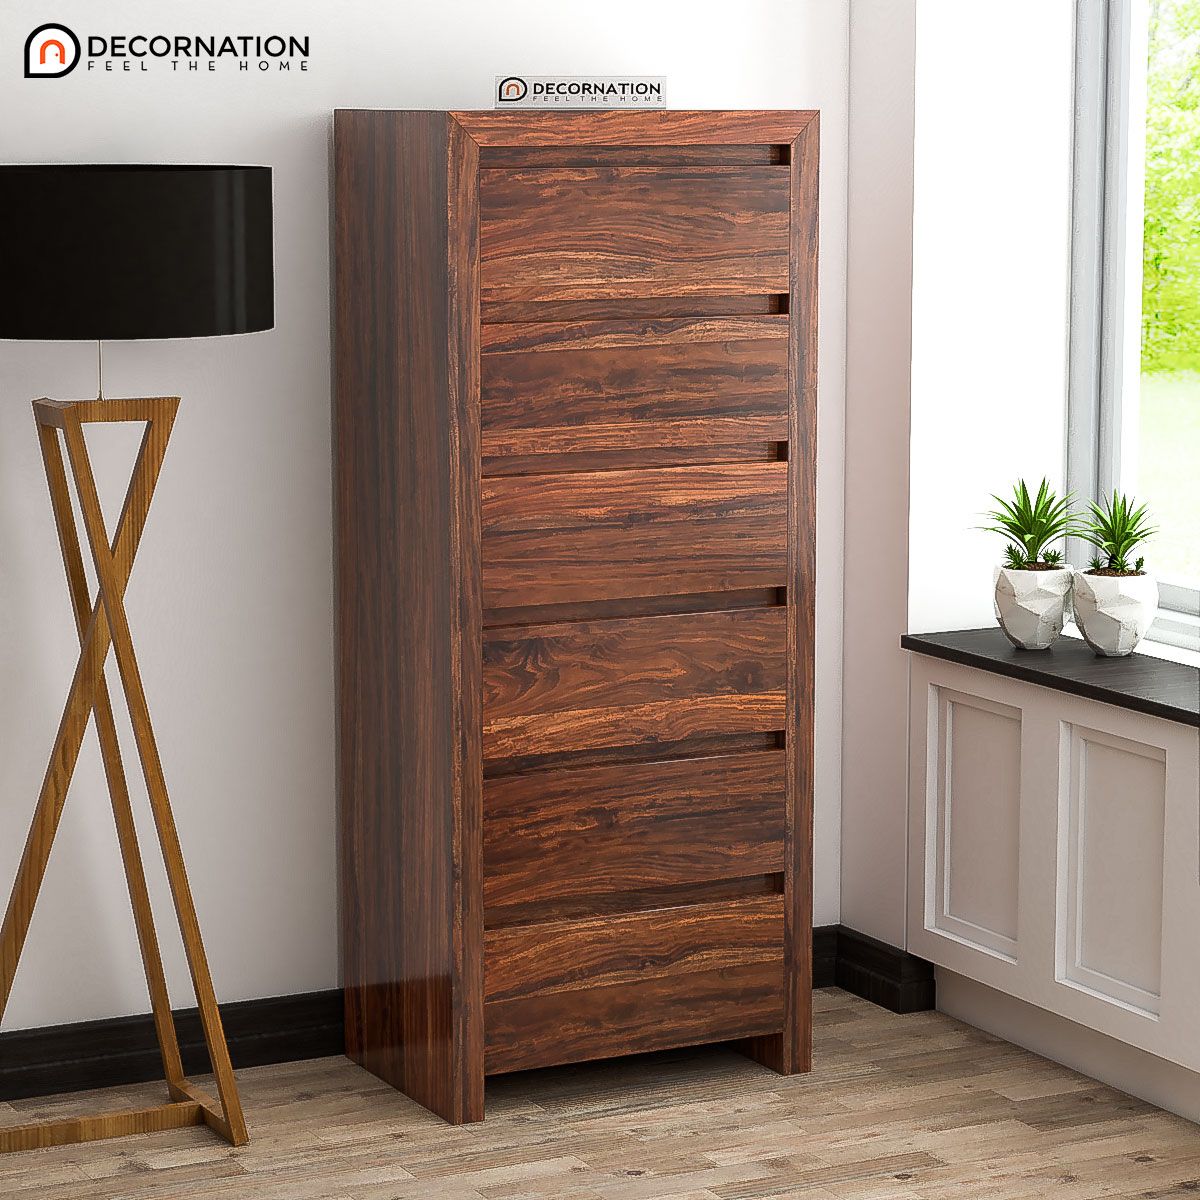 Adara Wooden Storage Cabinet – Natural Finish – Decornation In Wood Cabinet With Drawers (View 5 of 15)